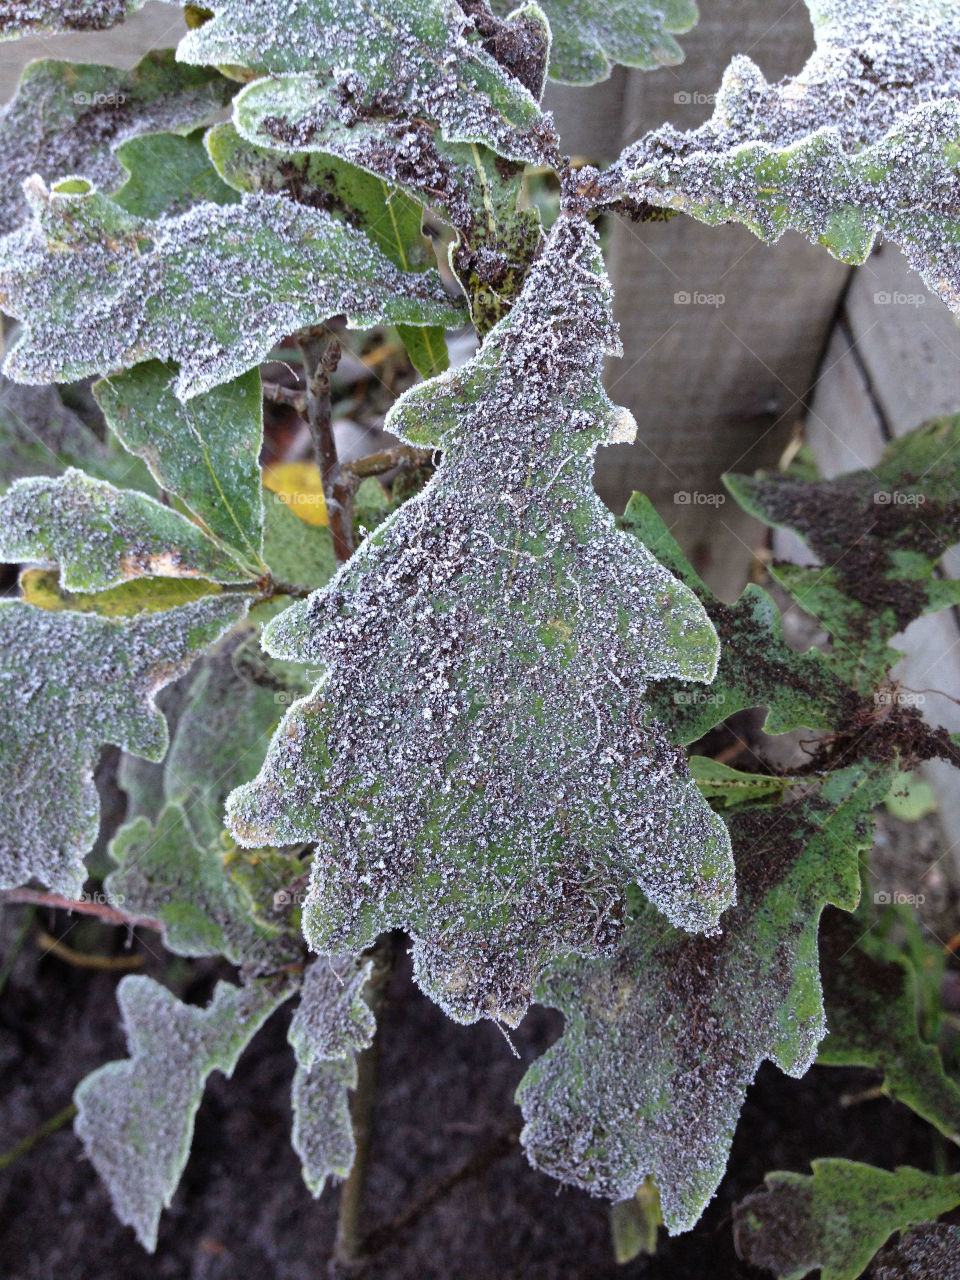 The frost on the oak leaves